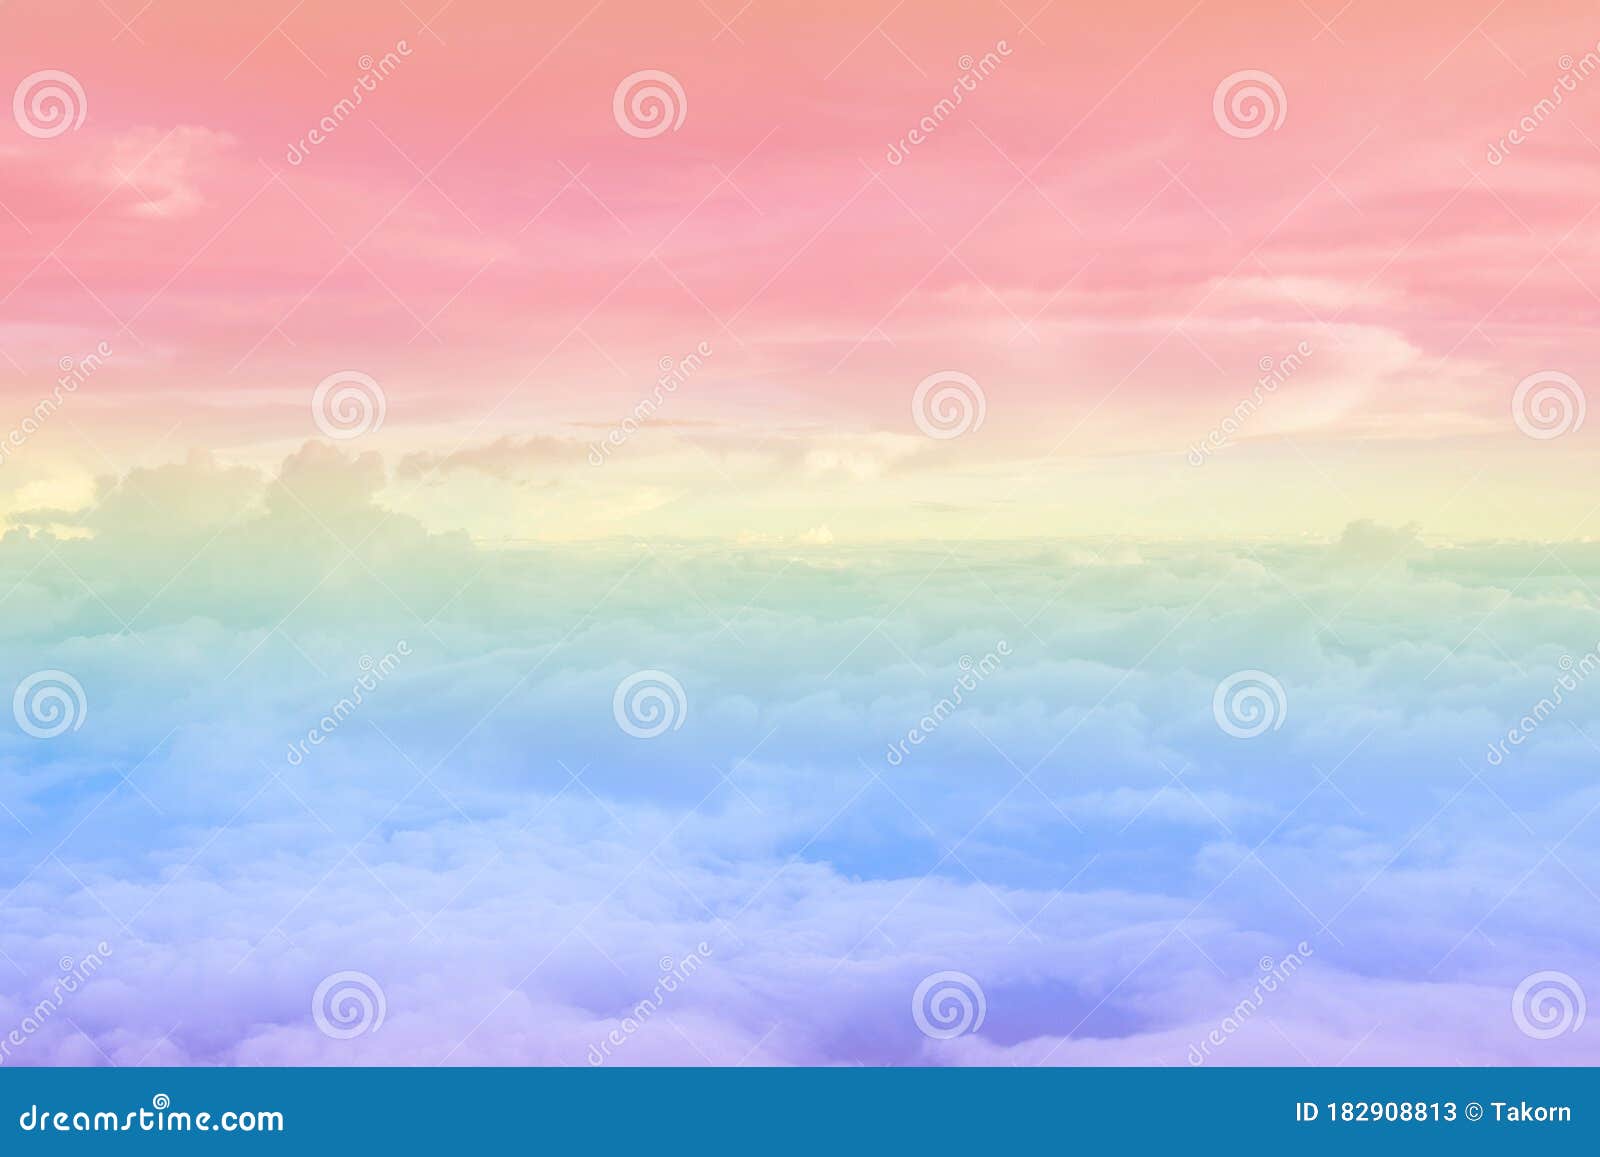 Sun and Cloud Background with a Pastel Colored Thailand,Ladies Full Zip Fleece with Pocket Cloud Sky S 